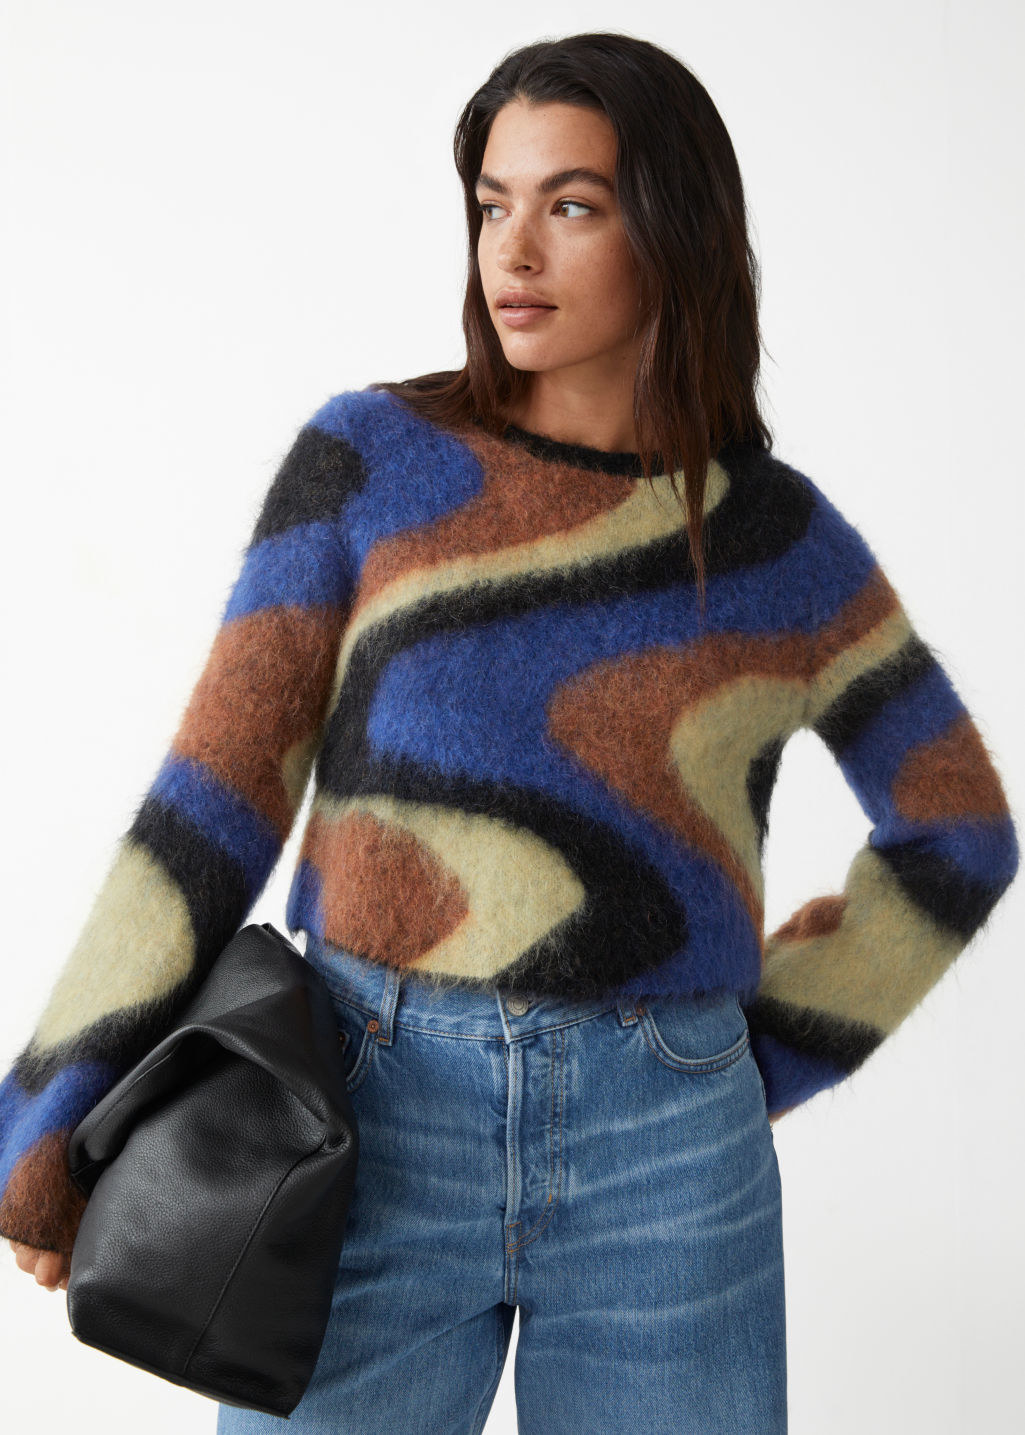 model in crewneck with wide sleeves in a cream, light brown, black, and blue swirl pattern